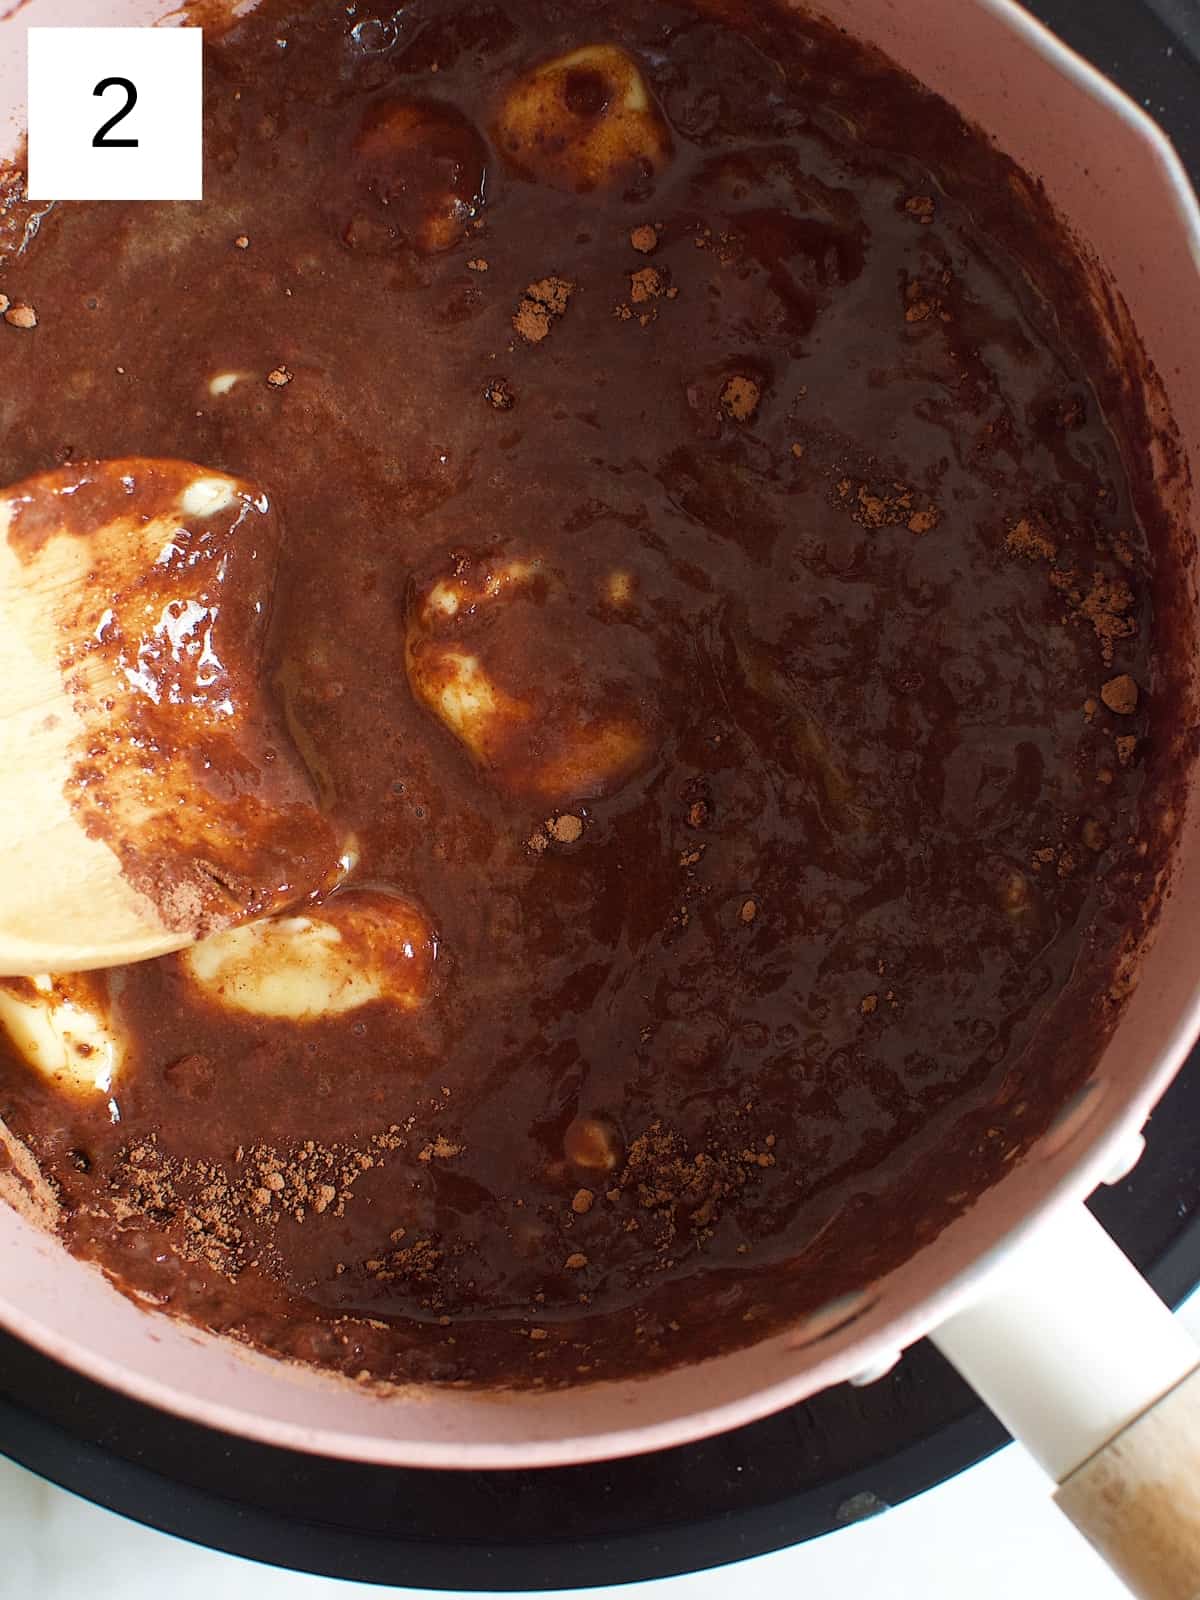 Cocoa mixture and melted butter in a heated nonstick pan.